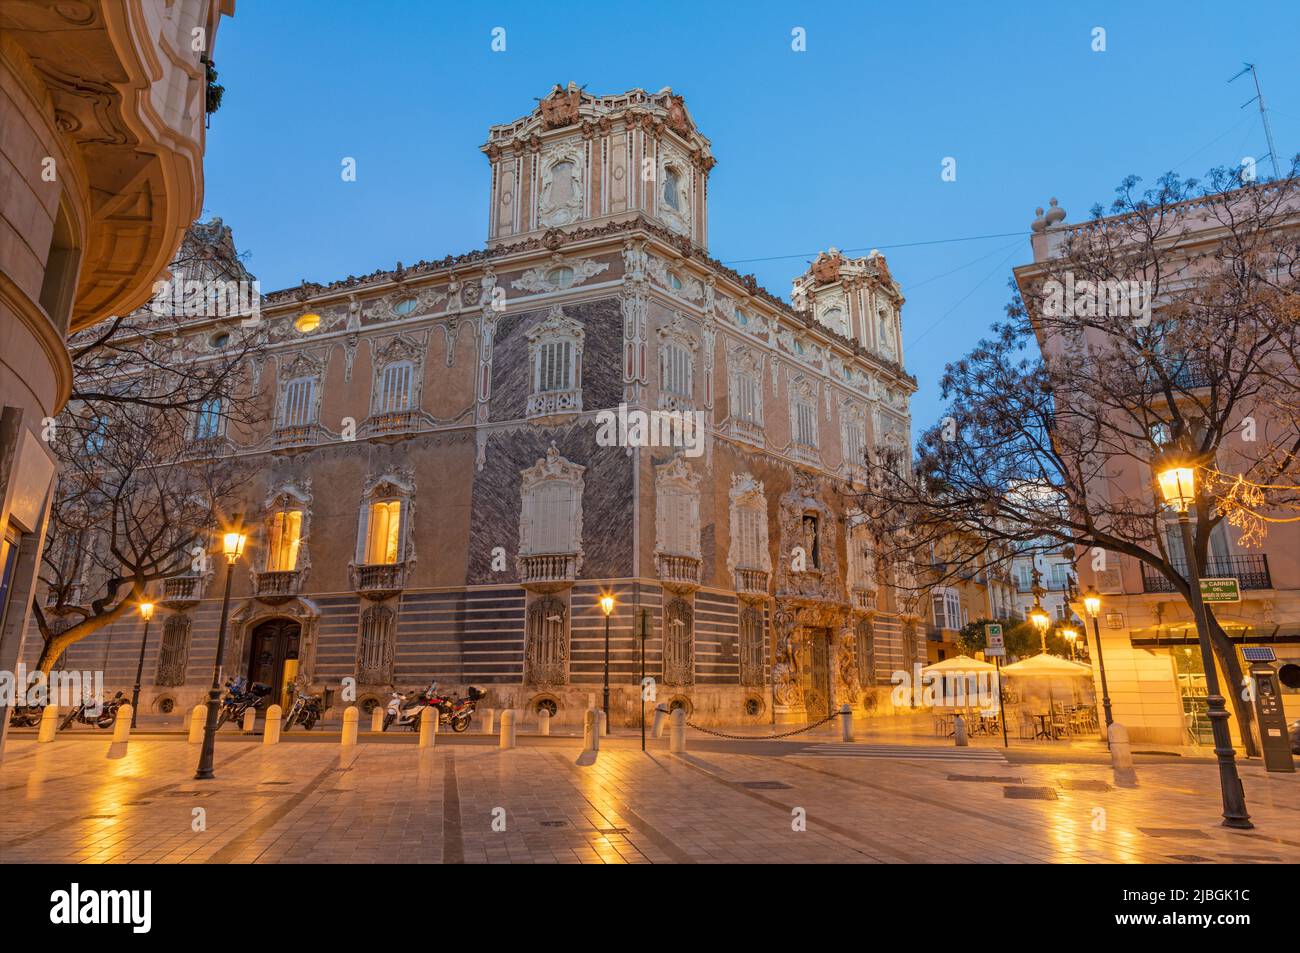 Valencia - The baroque Palace - Palace of the Marques de Dos Aguas at dusk. Stock Photo